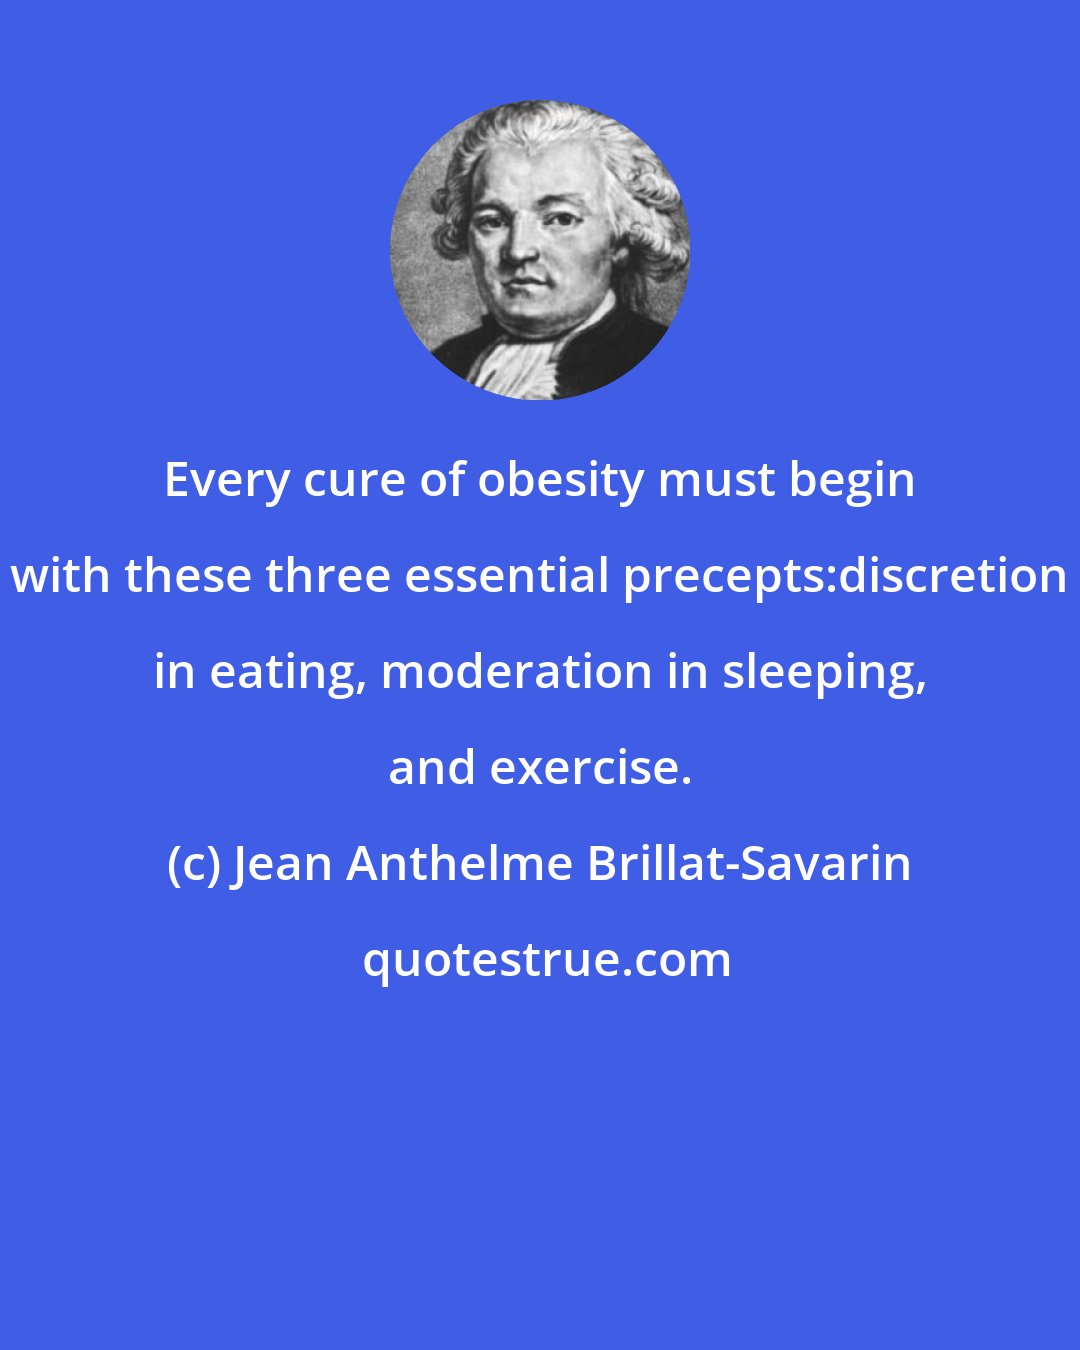 Jean Anthelme Brillat-Savarin: Every cure of obesity must begin with these three essential precepts:discretion in eating, moderation in sleeping, and exercise.